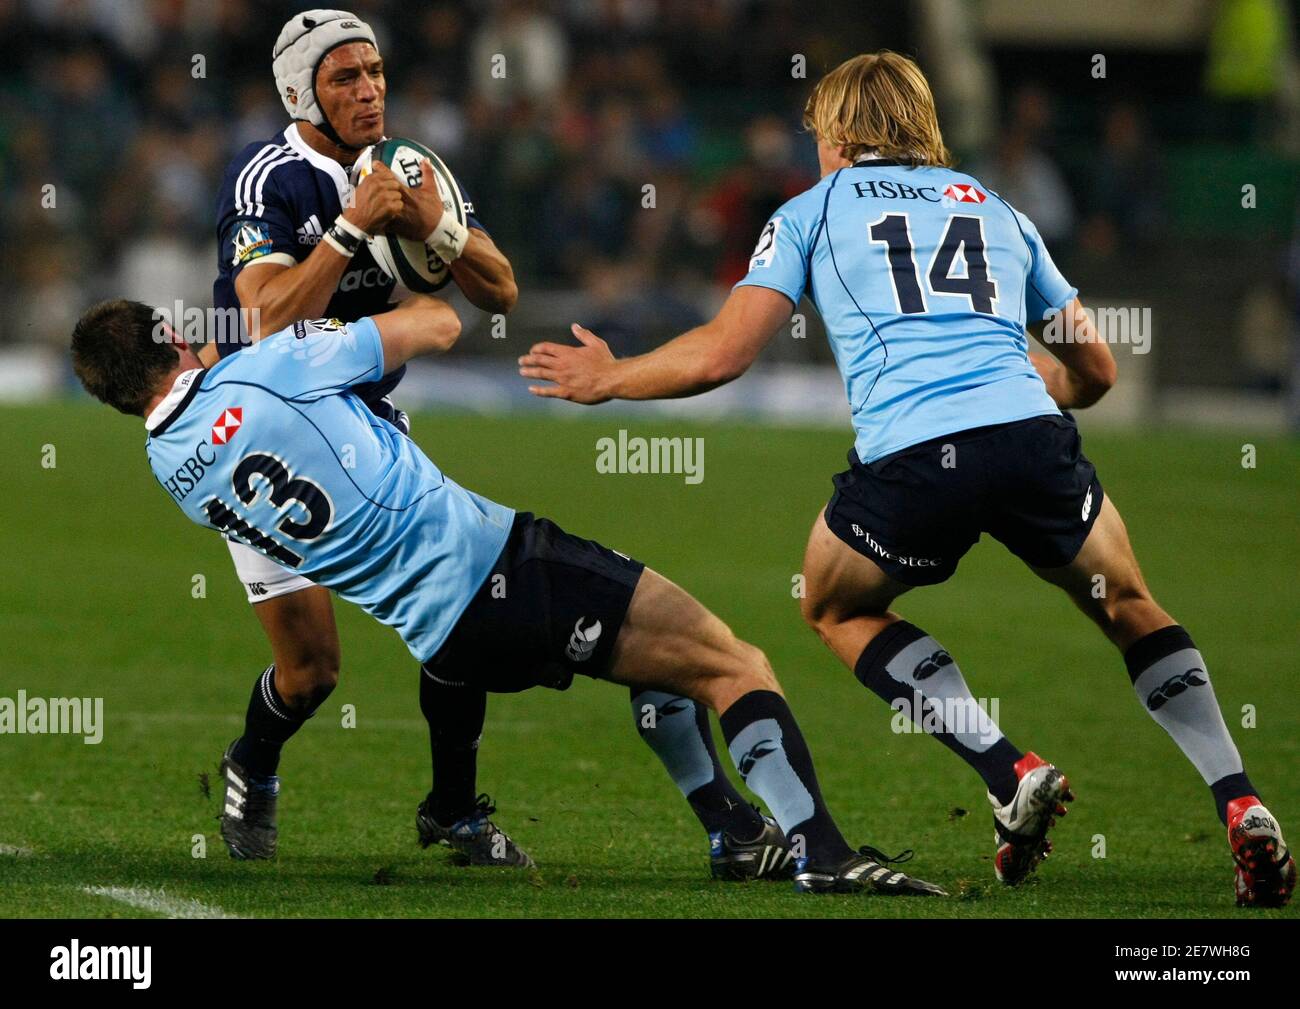 Gio Aplon of South Africa's Stormers attempts to break past Rob Horne (L) and Lachie Turner (R) of Australia's NSW Waratahs during their Super 14 semi-final rugby union match in Cape Town, May 22, 2010.  REUTERS/Mike Hutchings (SOUTH AFRICA - Tags: SPORT RUGBY) Stock Photo